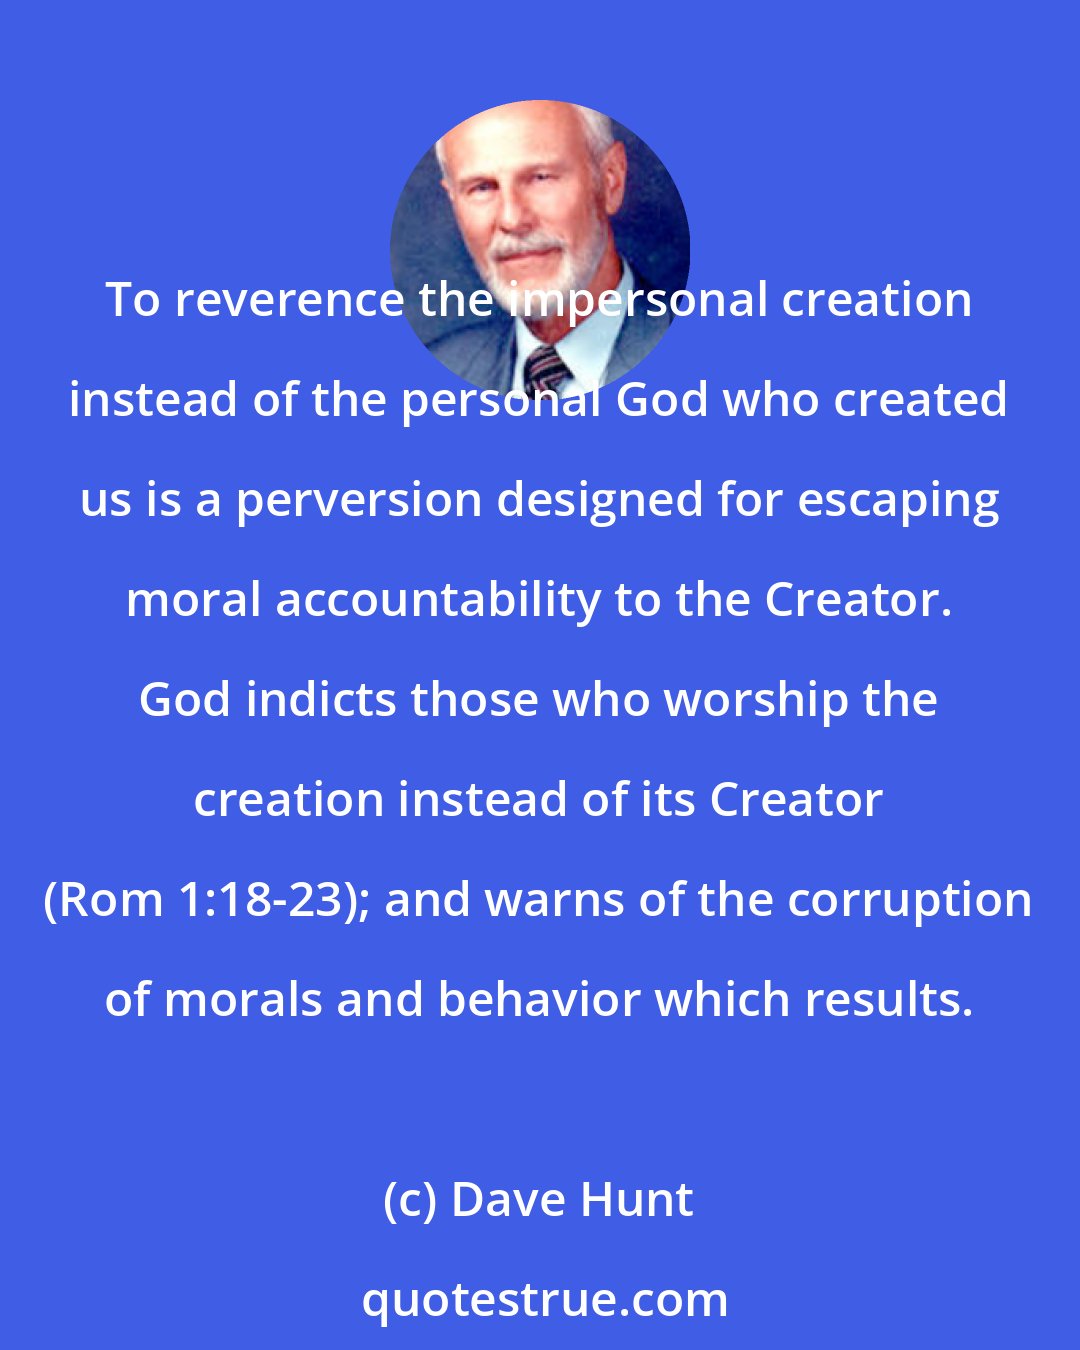 Dave Hunt: To reverence the impersonal creation instead of the personal God who created us is a perversion designed for escaping moral accountability to the Creator. God indicts those who worship the creation instead of its Creator (Rom 1:18-23); and warns of the corruption of morals and behavior which results.